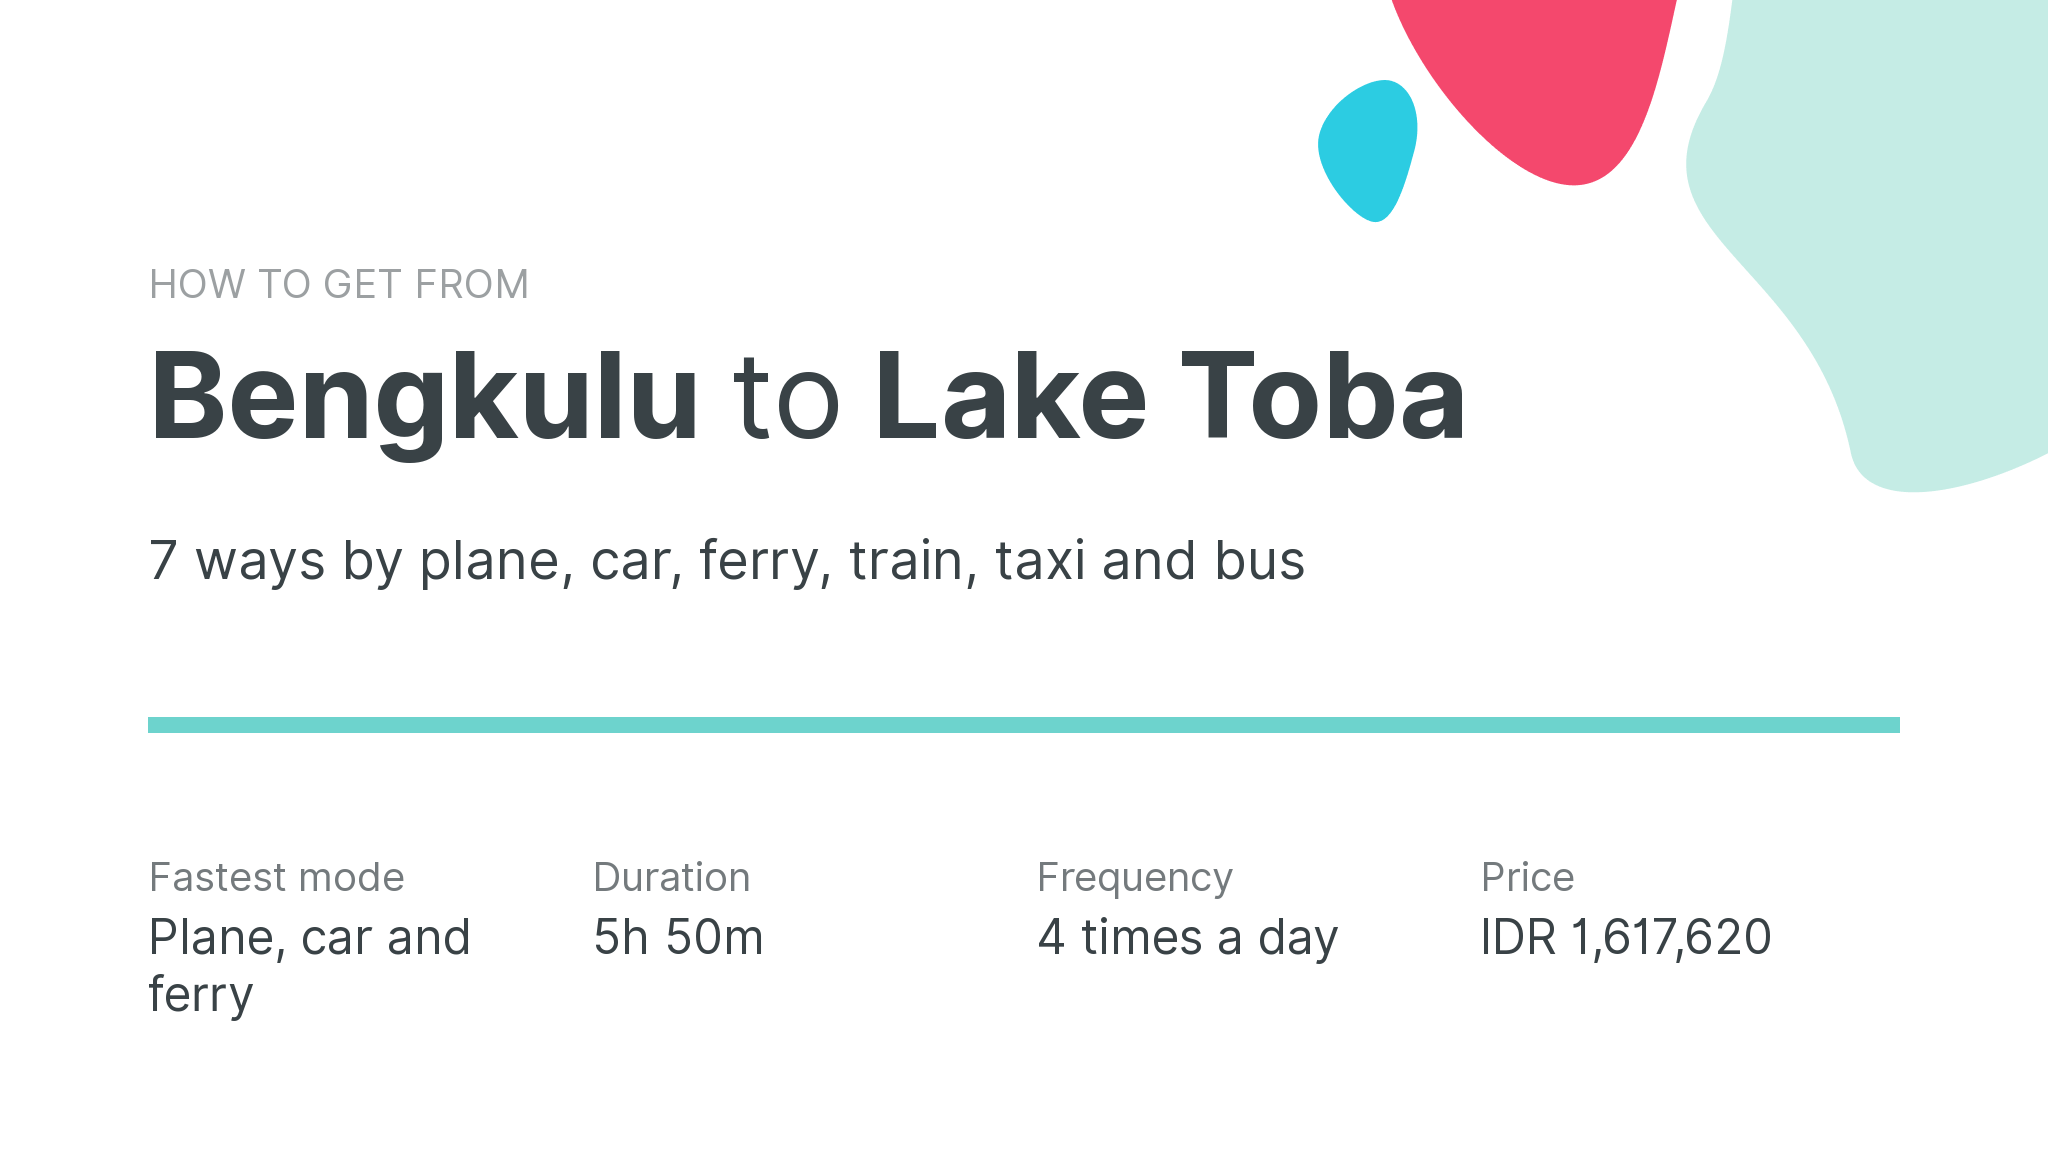 How do I get from Bengkulu to Lake Toba